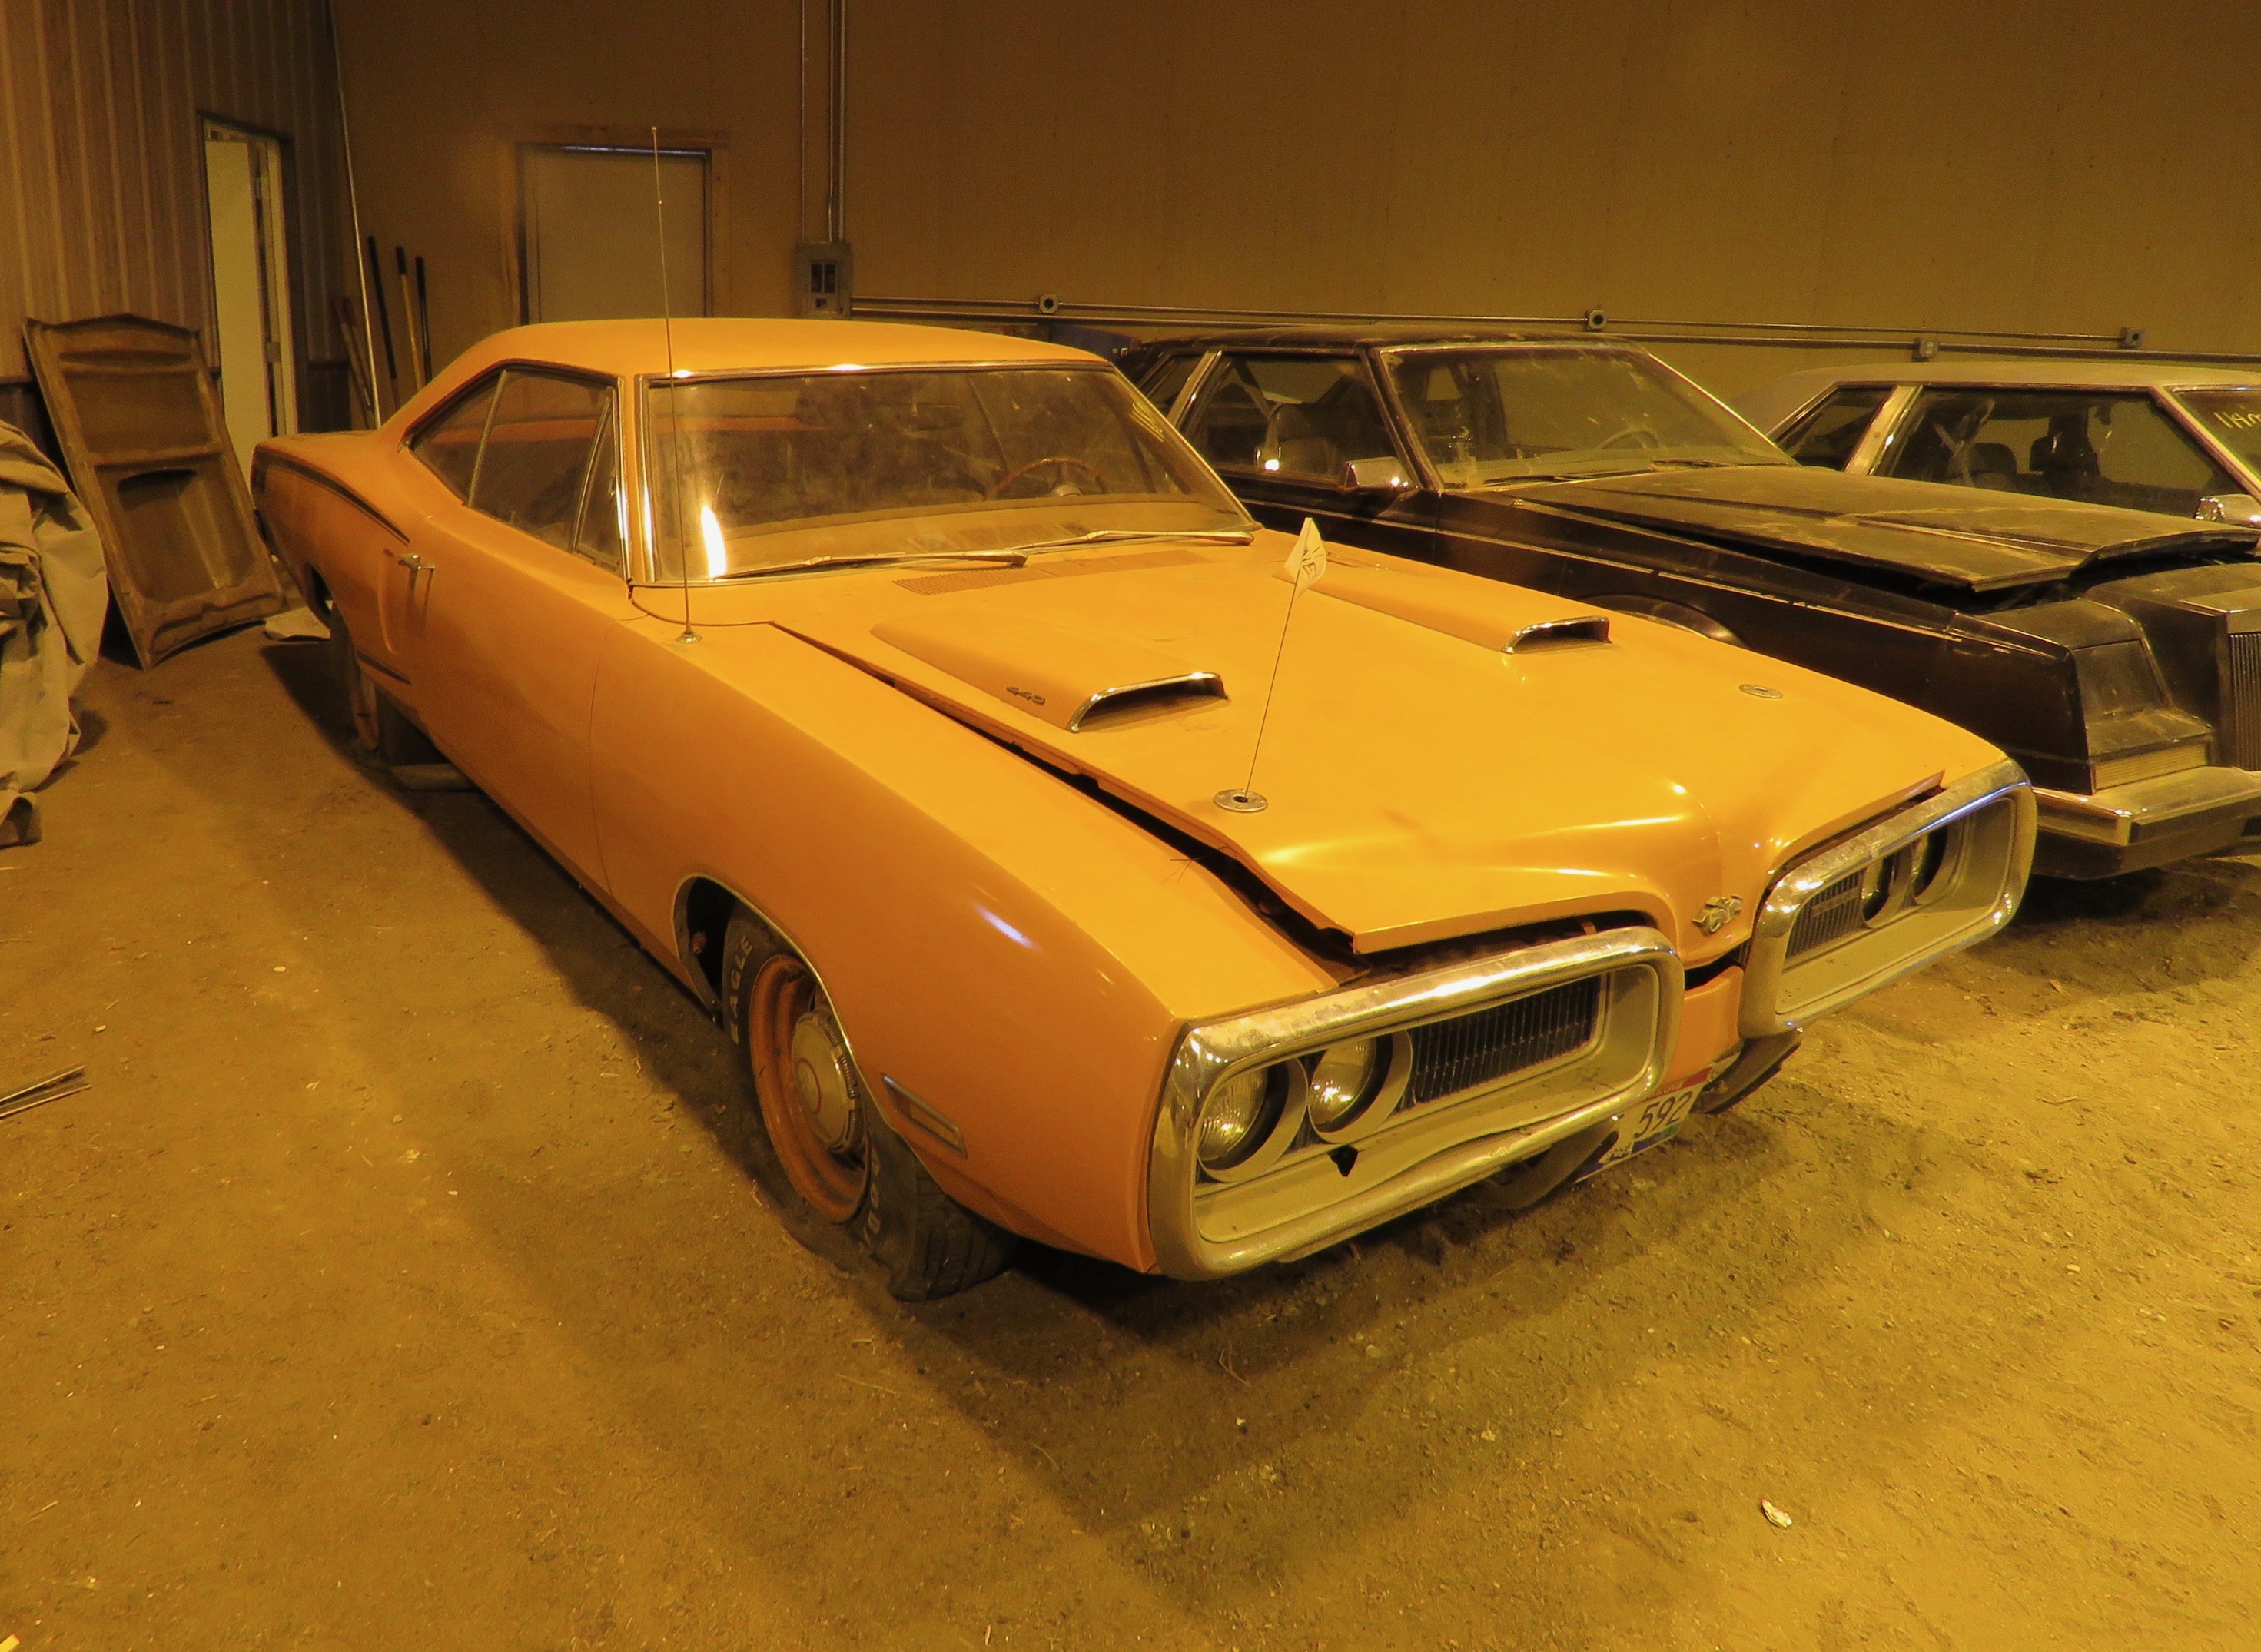 Barn-finds indeed! VanDerBrink auctioning fields of dreams | ClassicCars